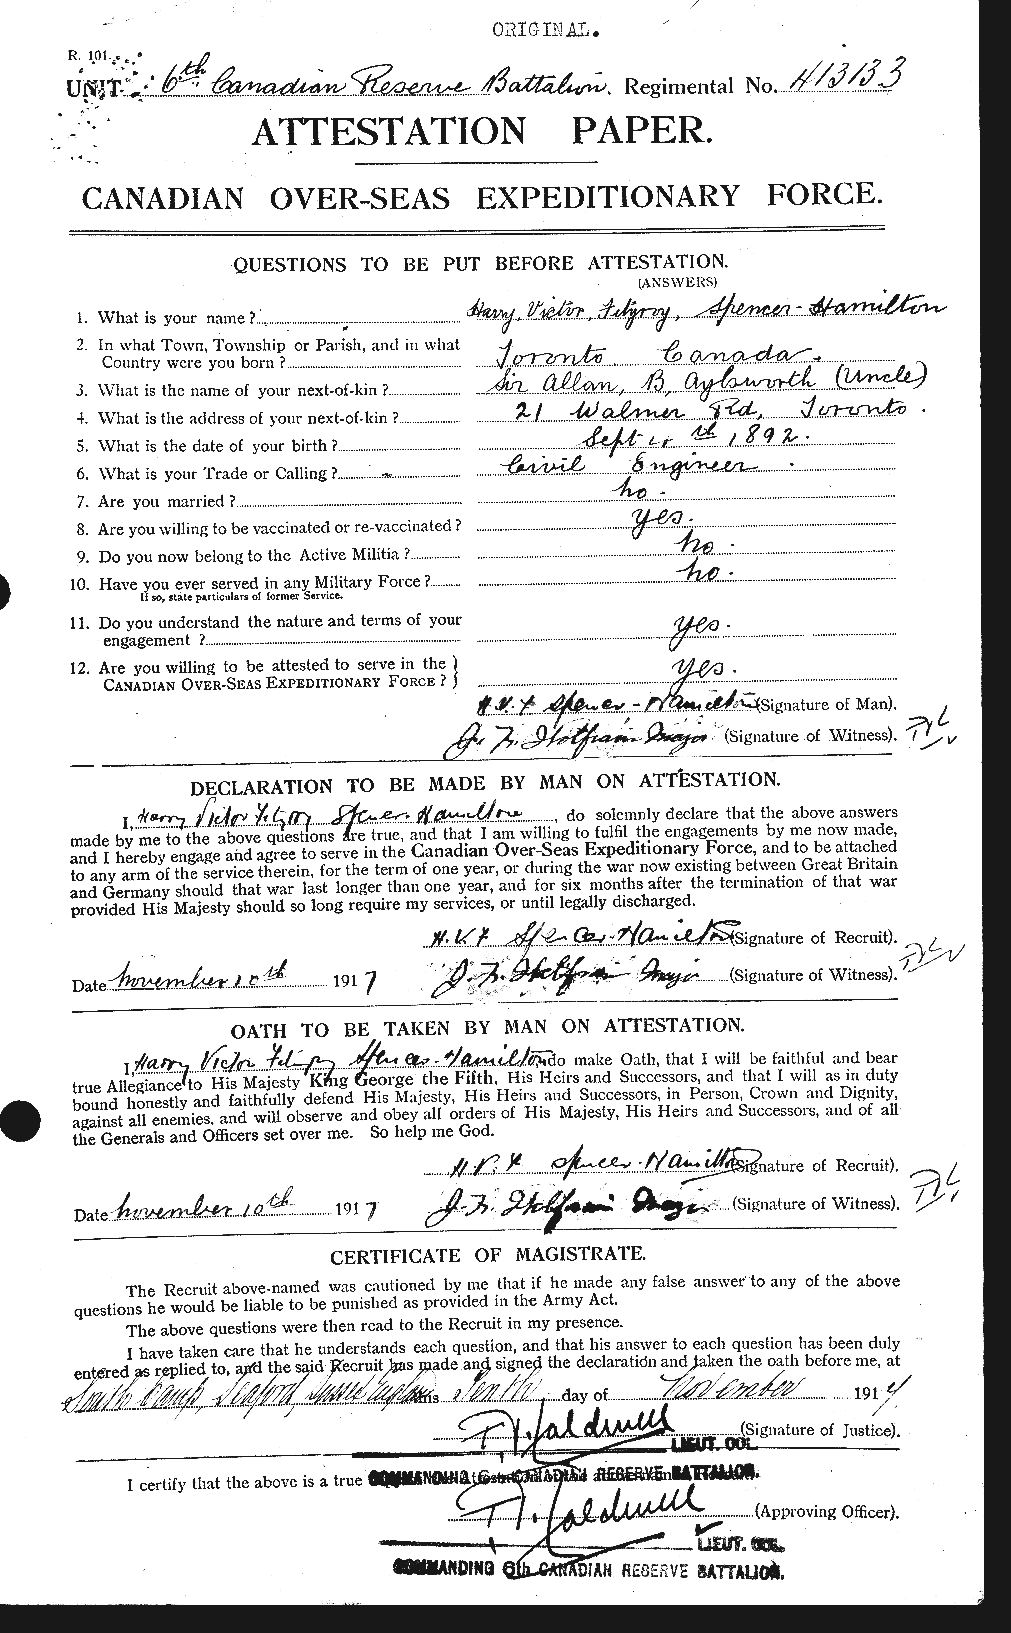 Personnel Records of the First World War - CEF 113985a